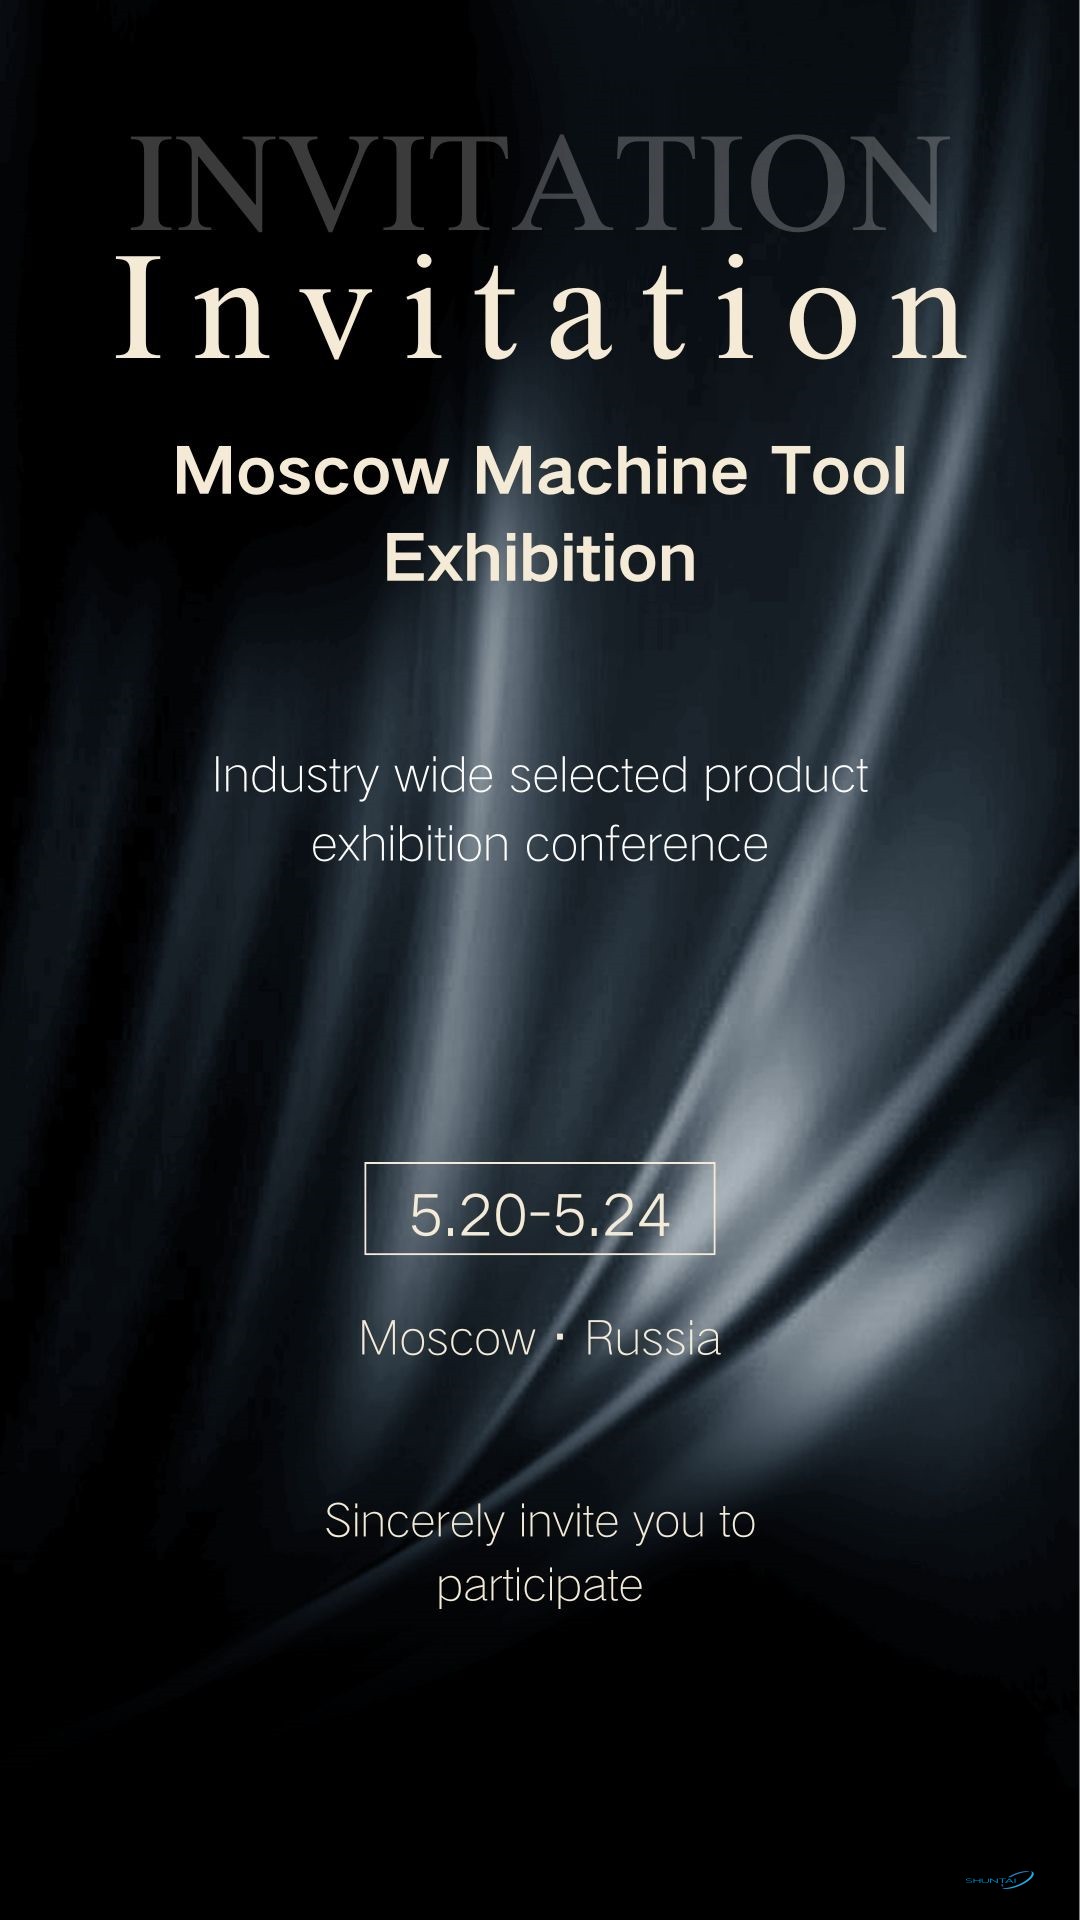 Exhibition Notice | Moscow Machine Tool Exhibition Russia